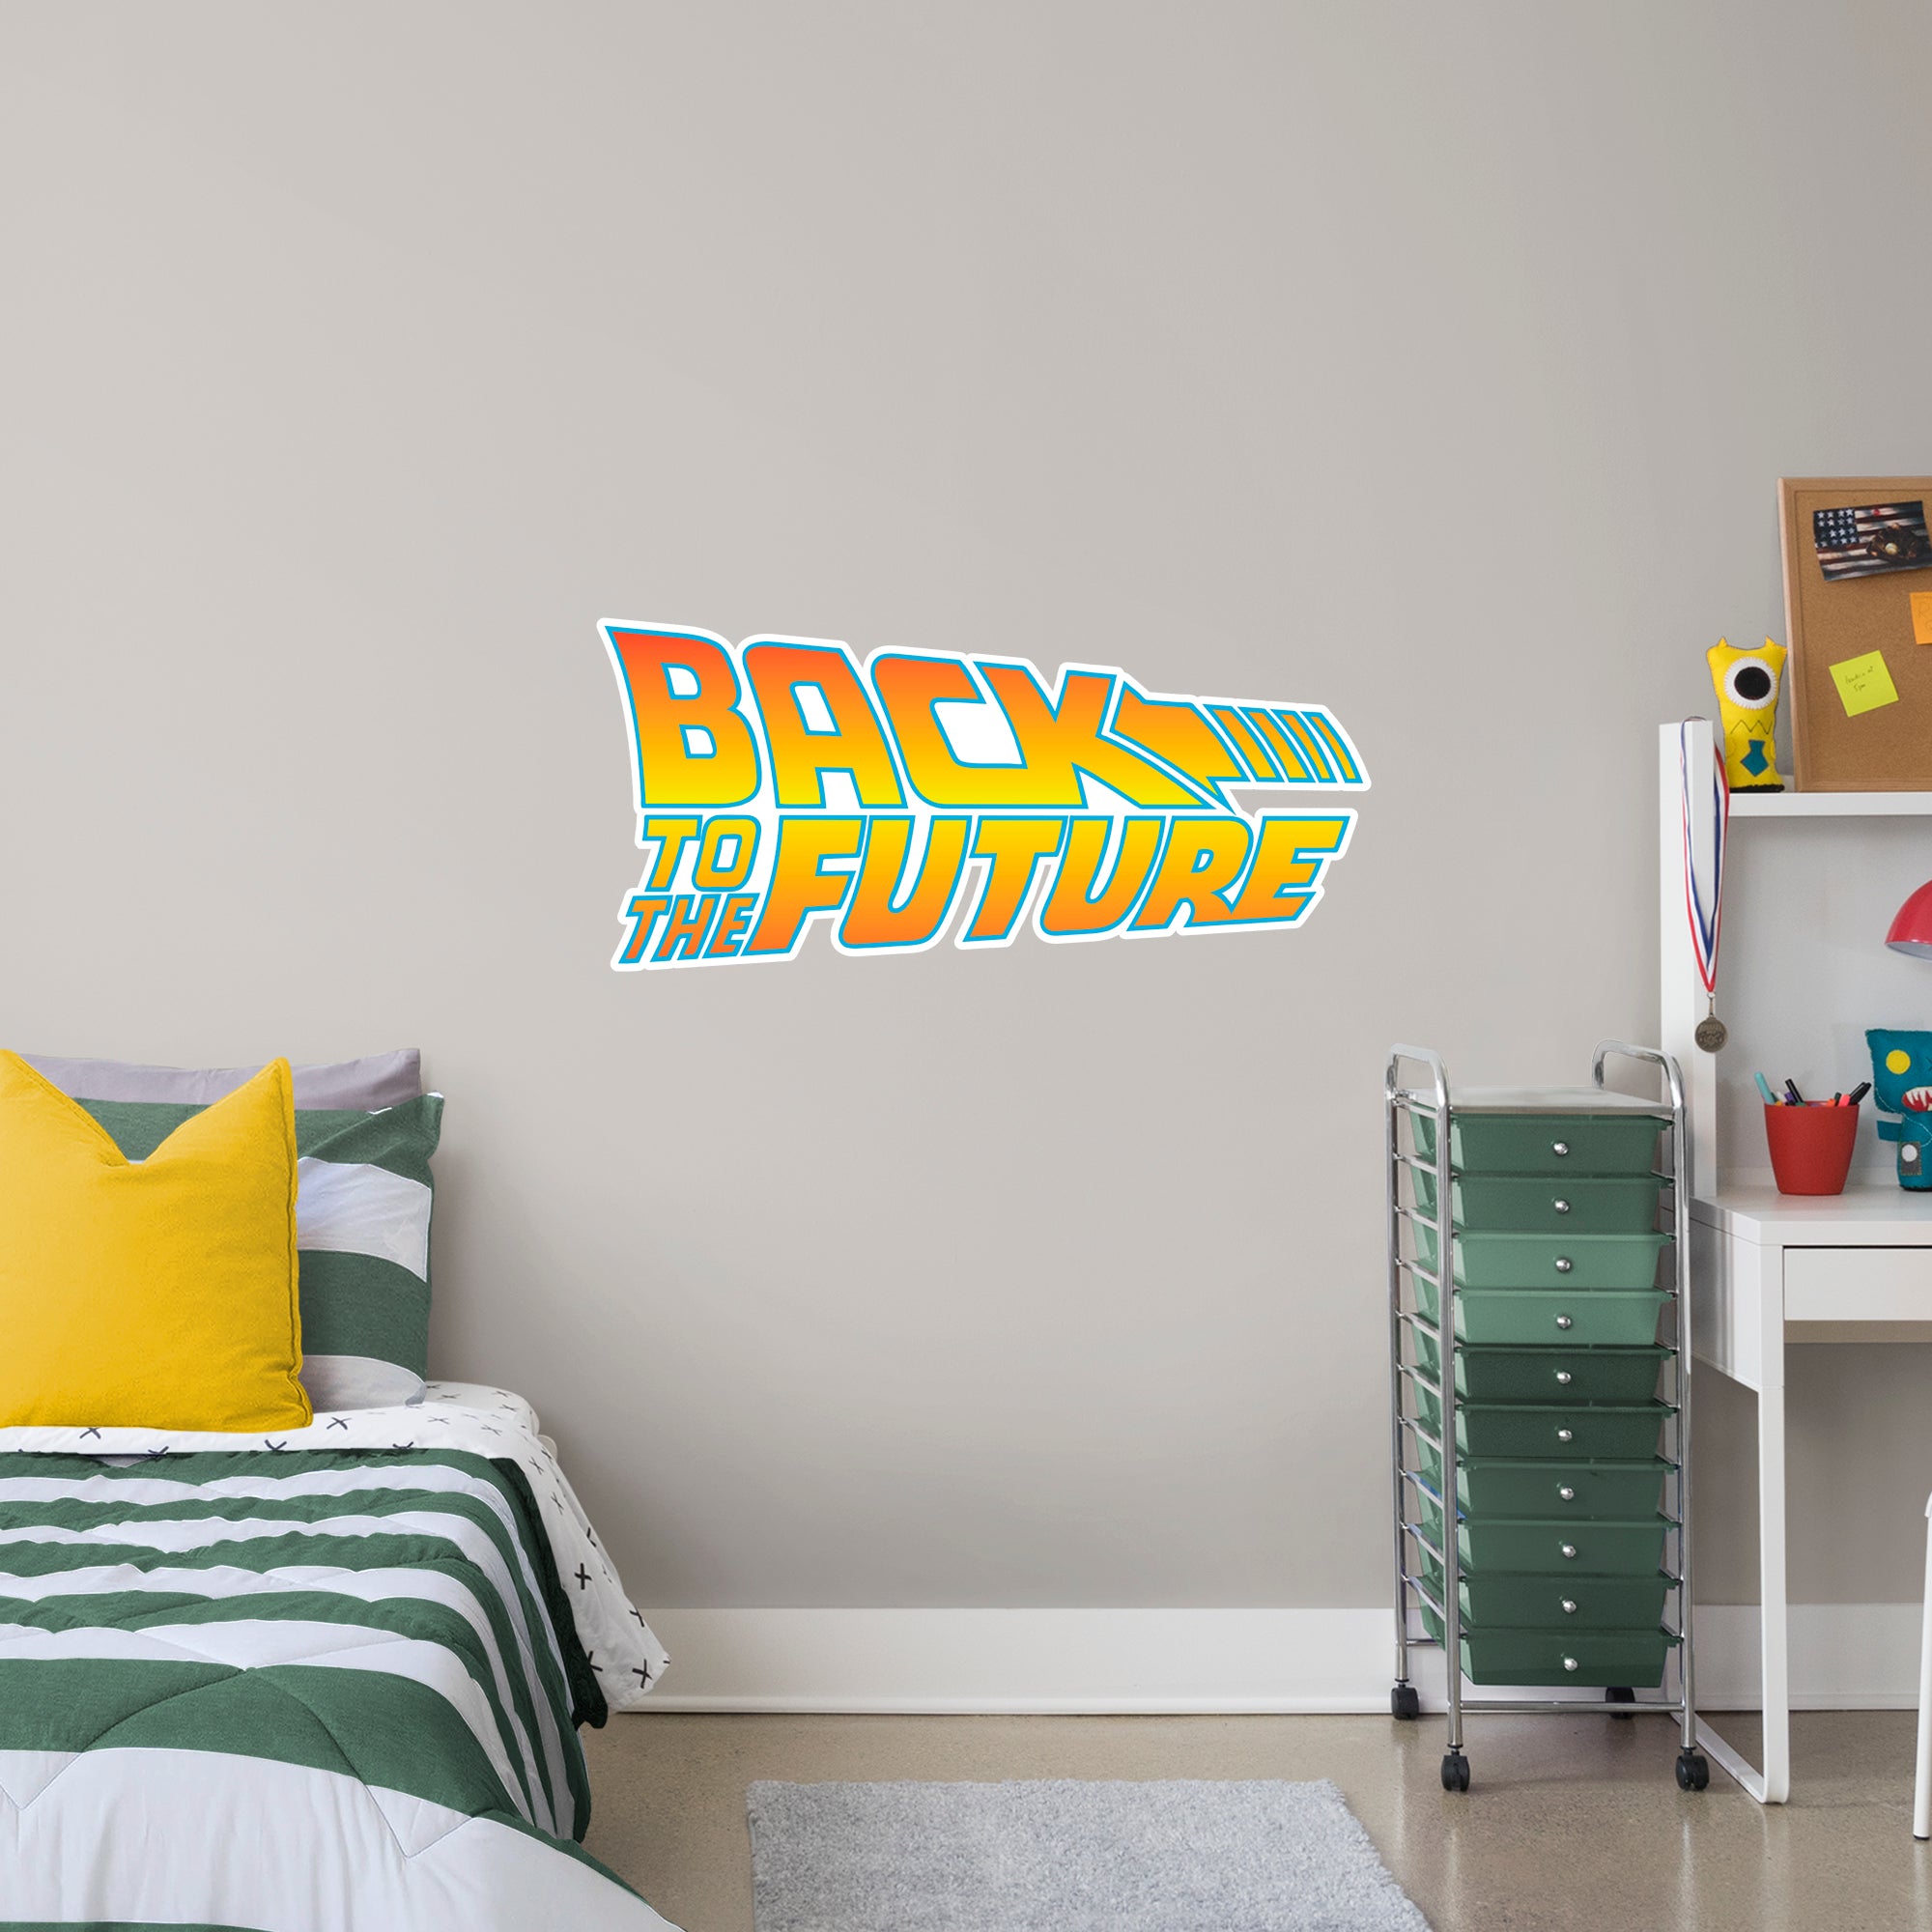 BACK TO THE FUTURE LOGO OFFICIALLY LICENSED NBC UNIVERSAL REMOVABLE Wall DECAL Giant Decal by Fathead | Vinyl